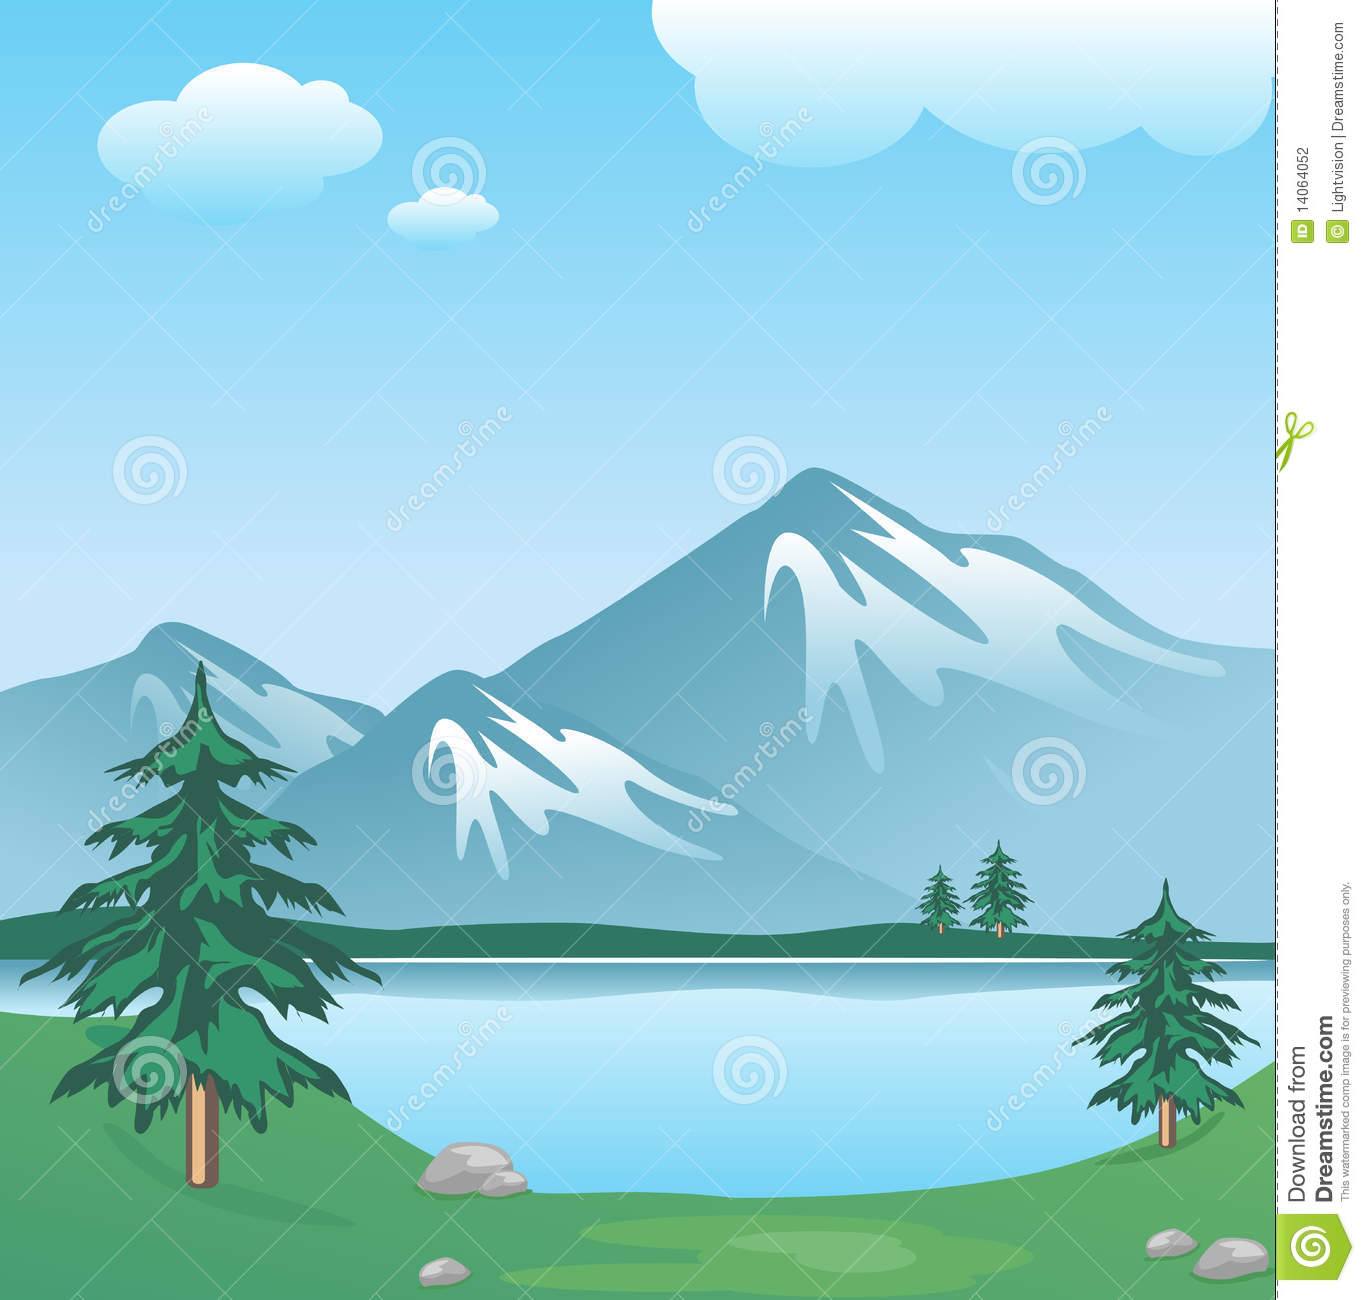 Lake Clipart Lake Trees And Grass In